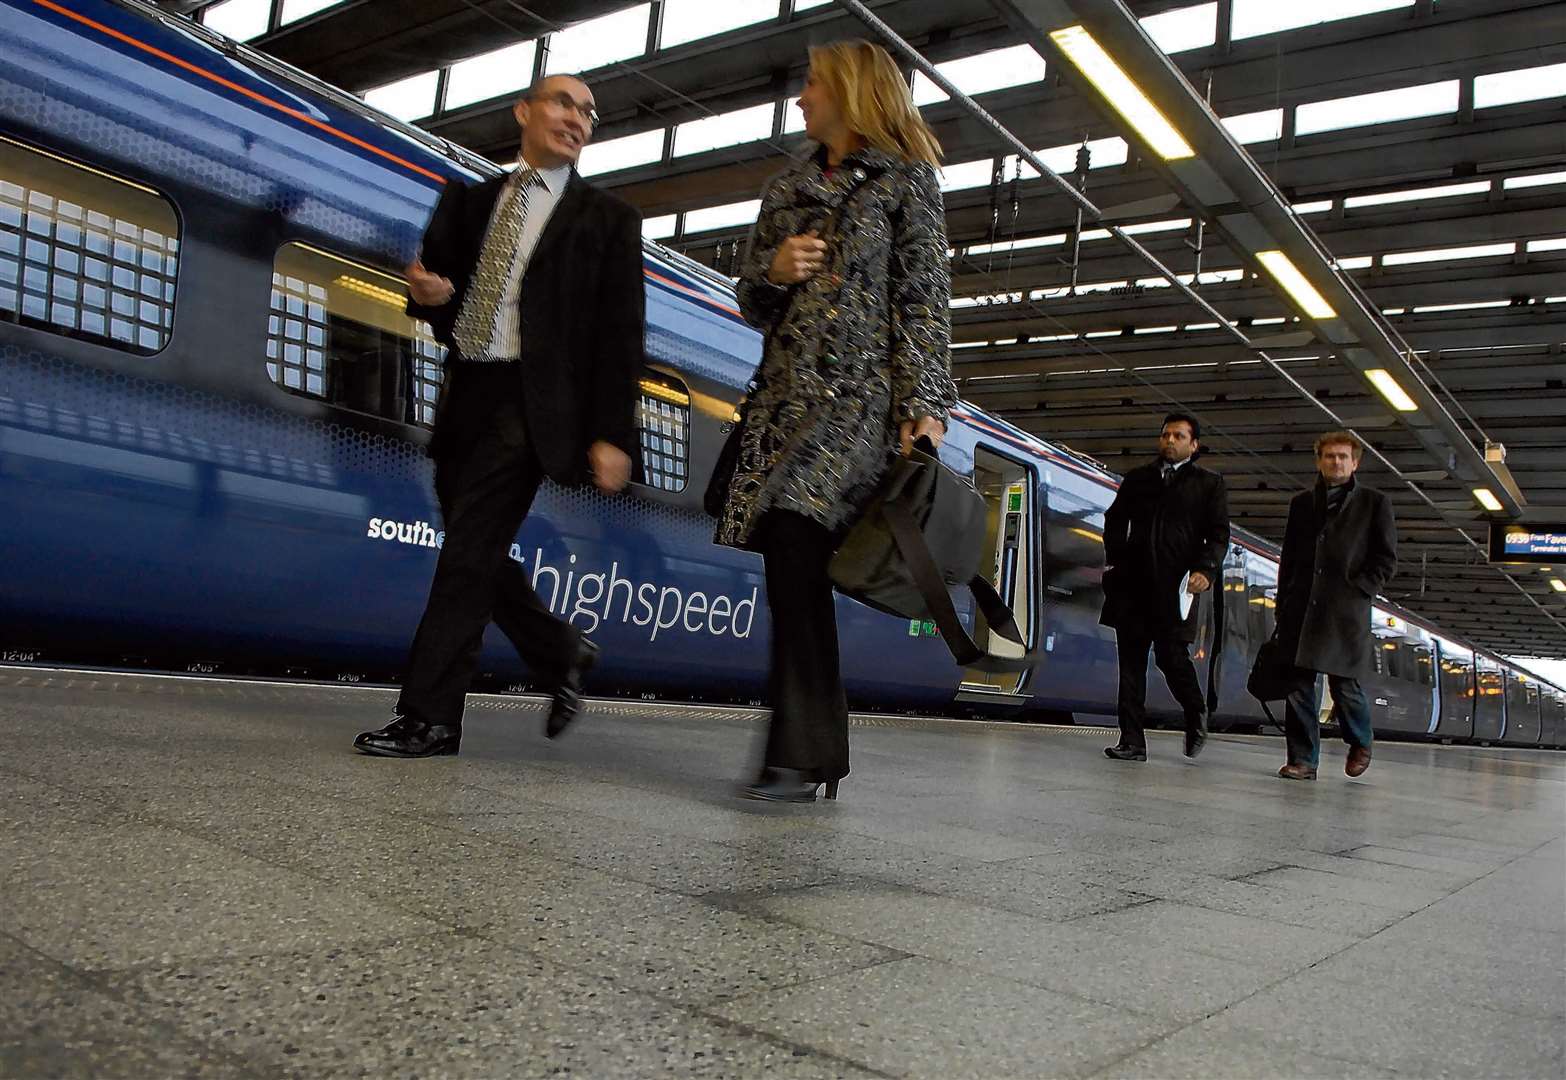 The first commuters arrive at St Pancras when the domestic high-speed services to the station began